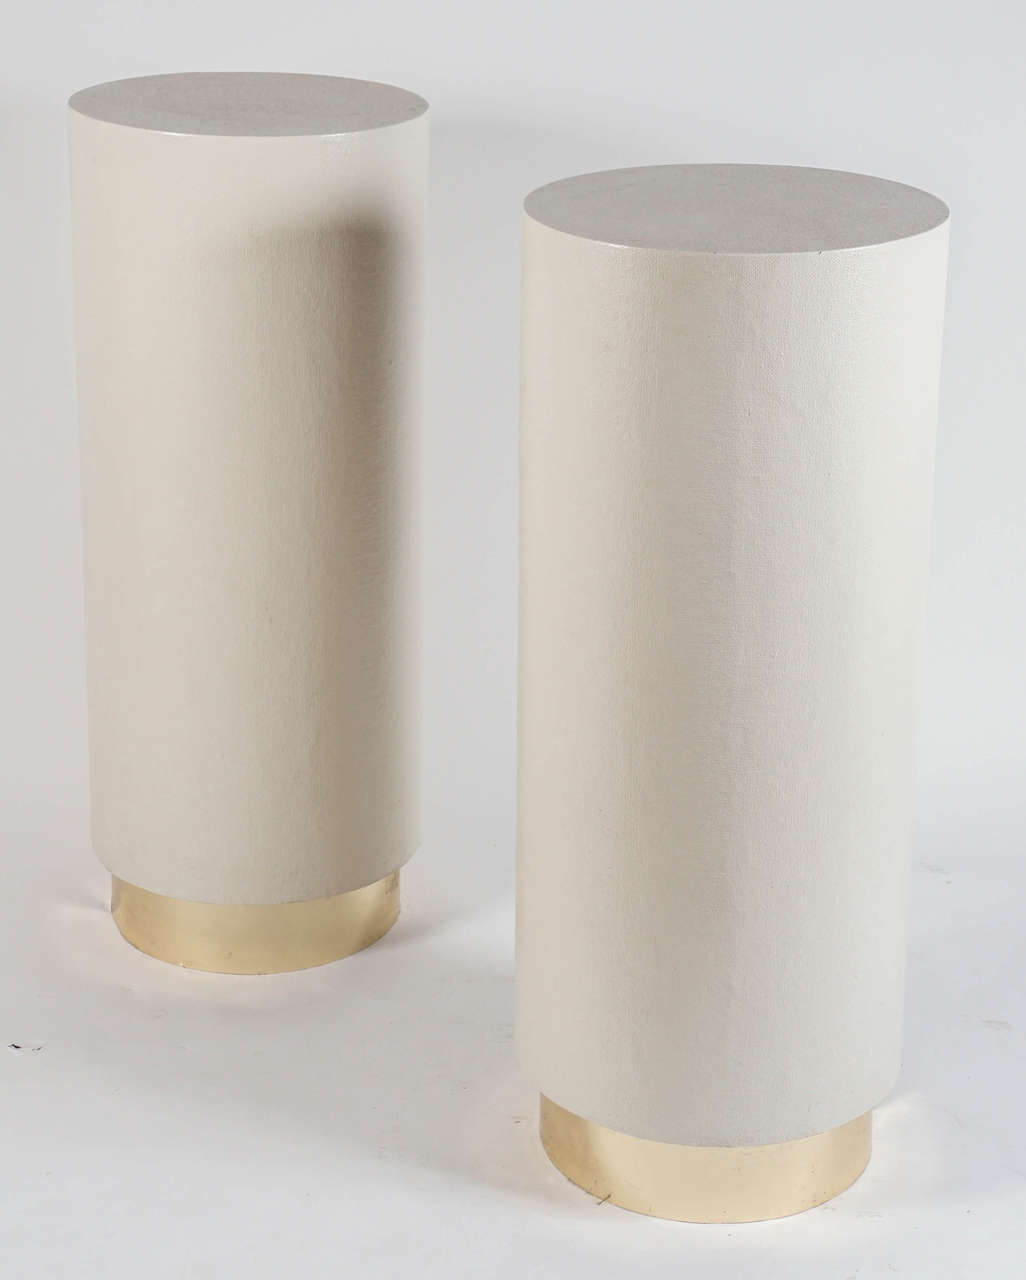 Chic and simple:  lacquer wrapped columns on brass plinth bases.   Great vintage condition.